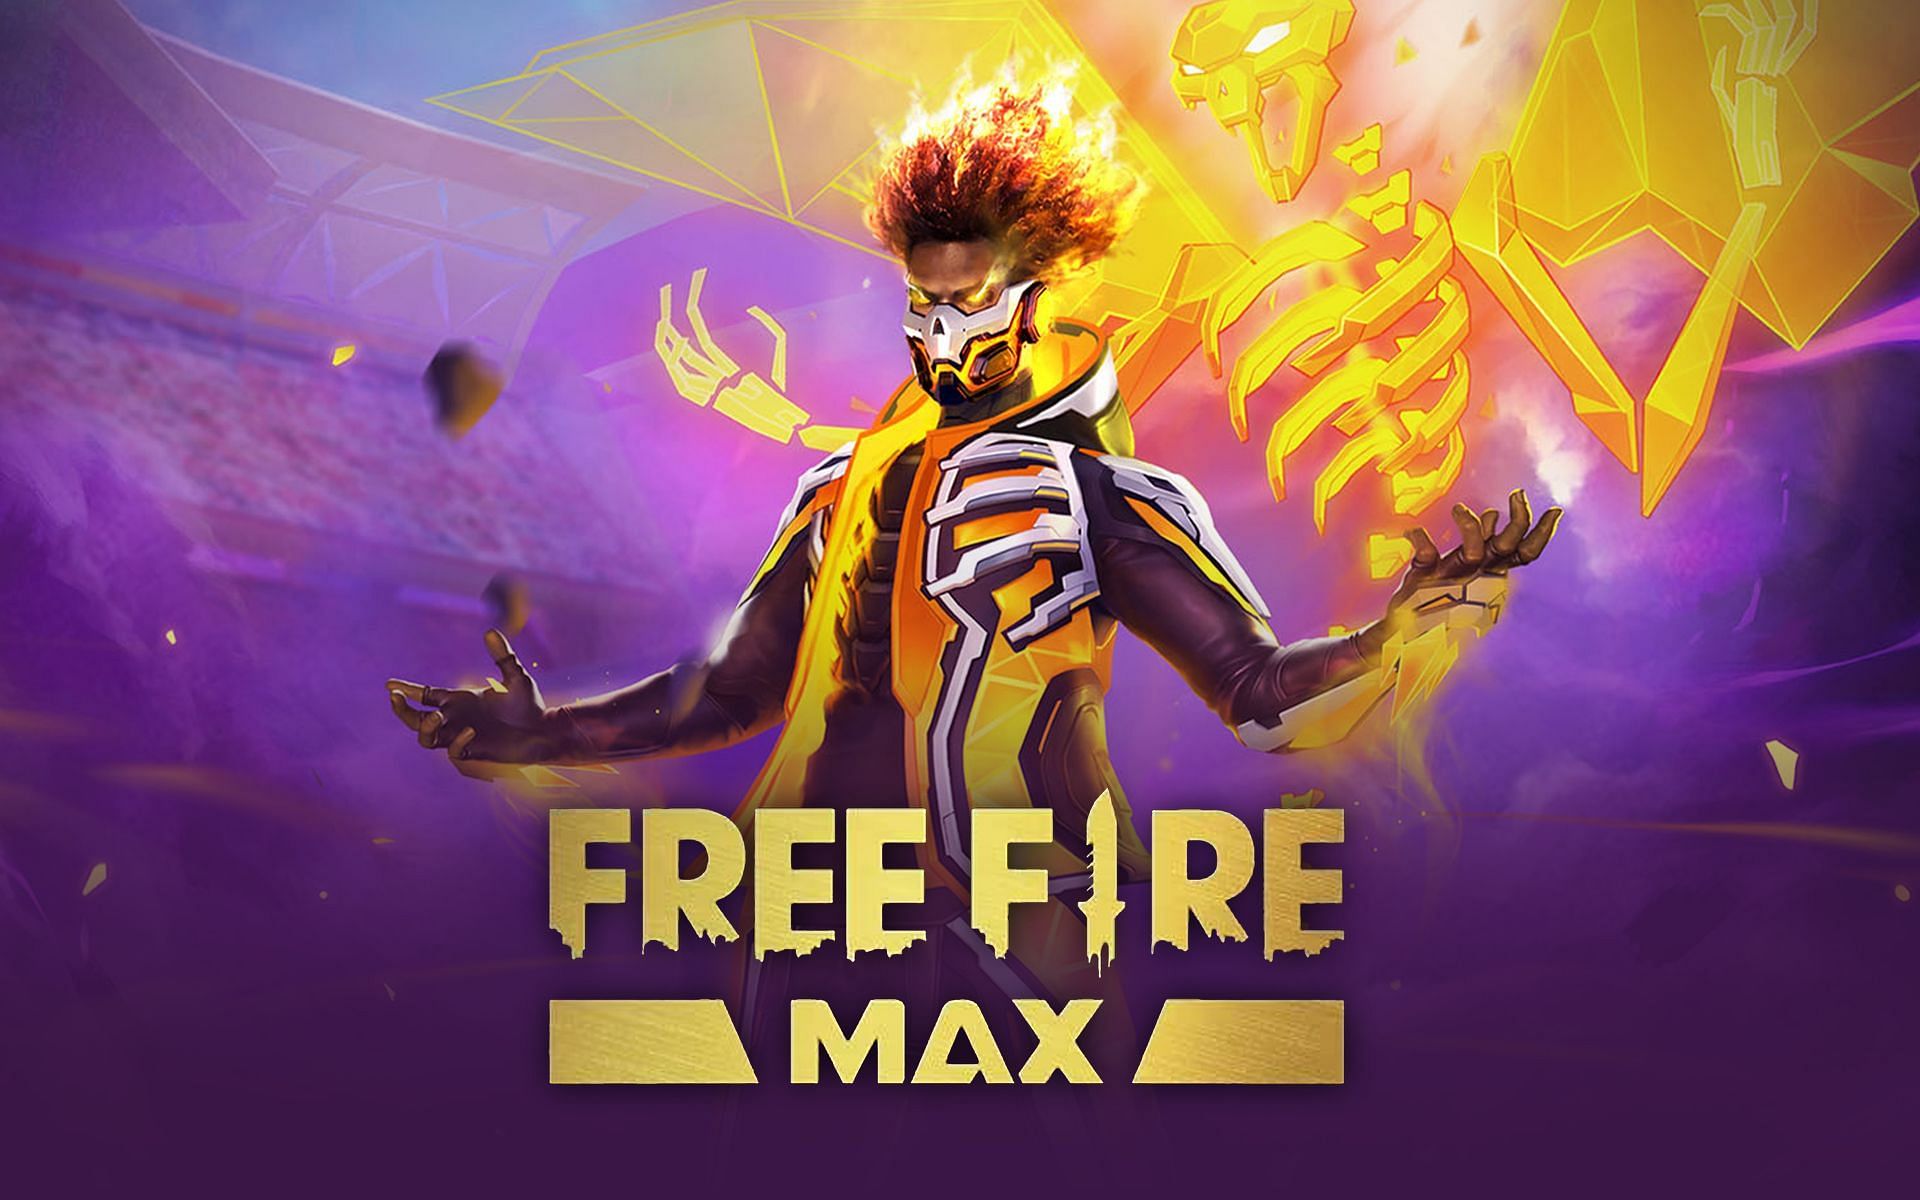 How to find cool names for Free Fire MAX user ids (Image via Sportskeeda)